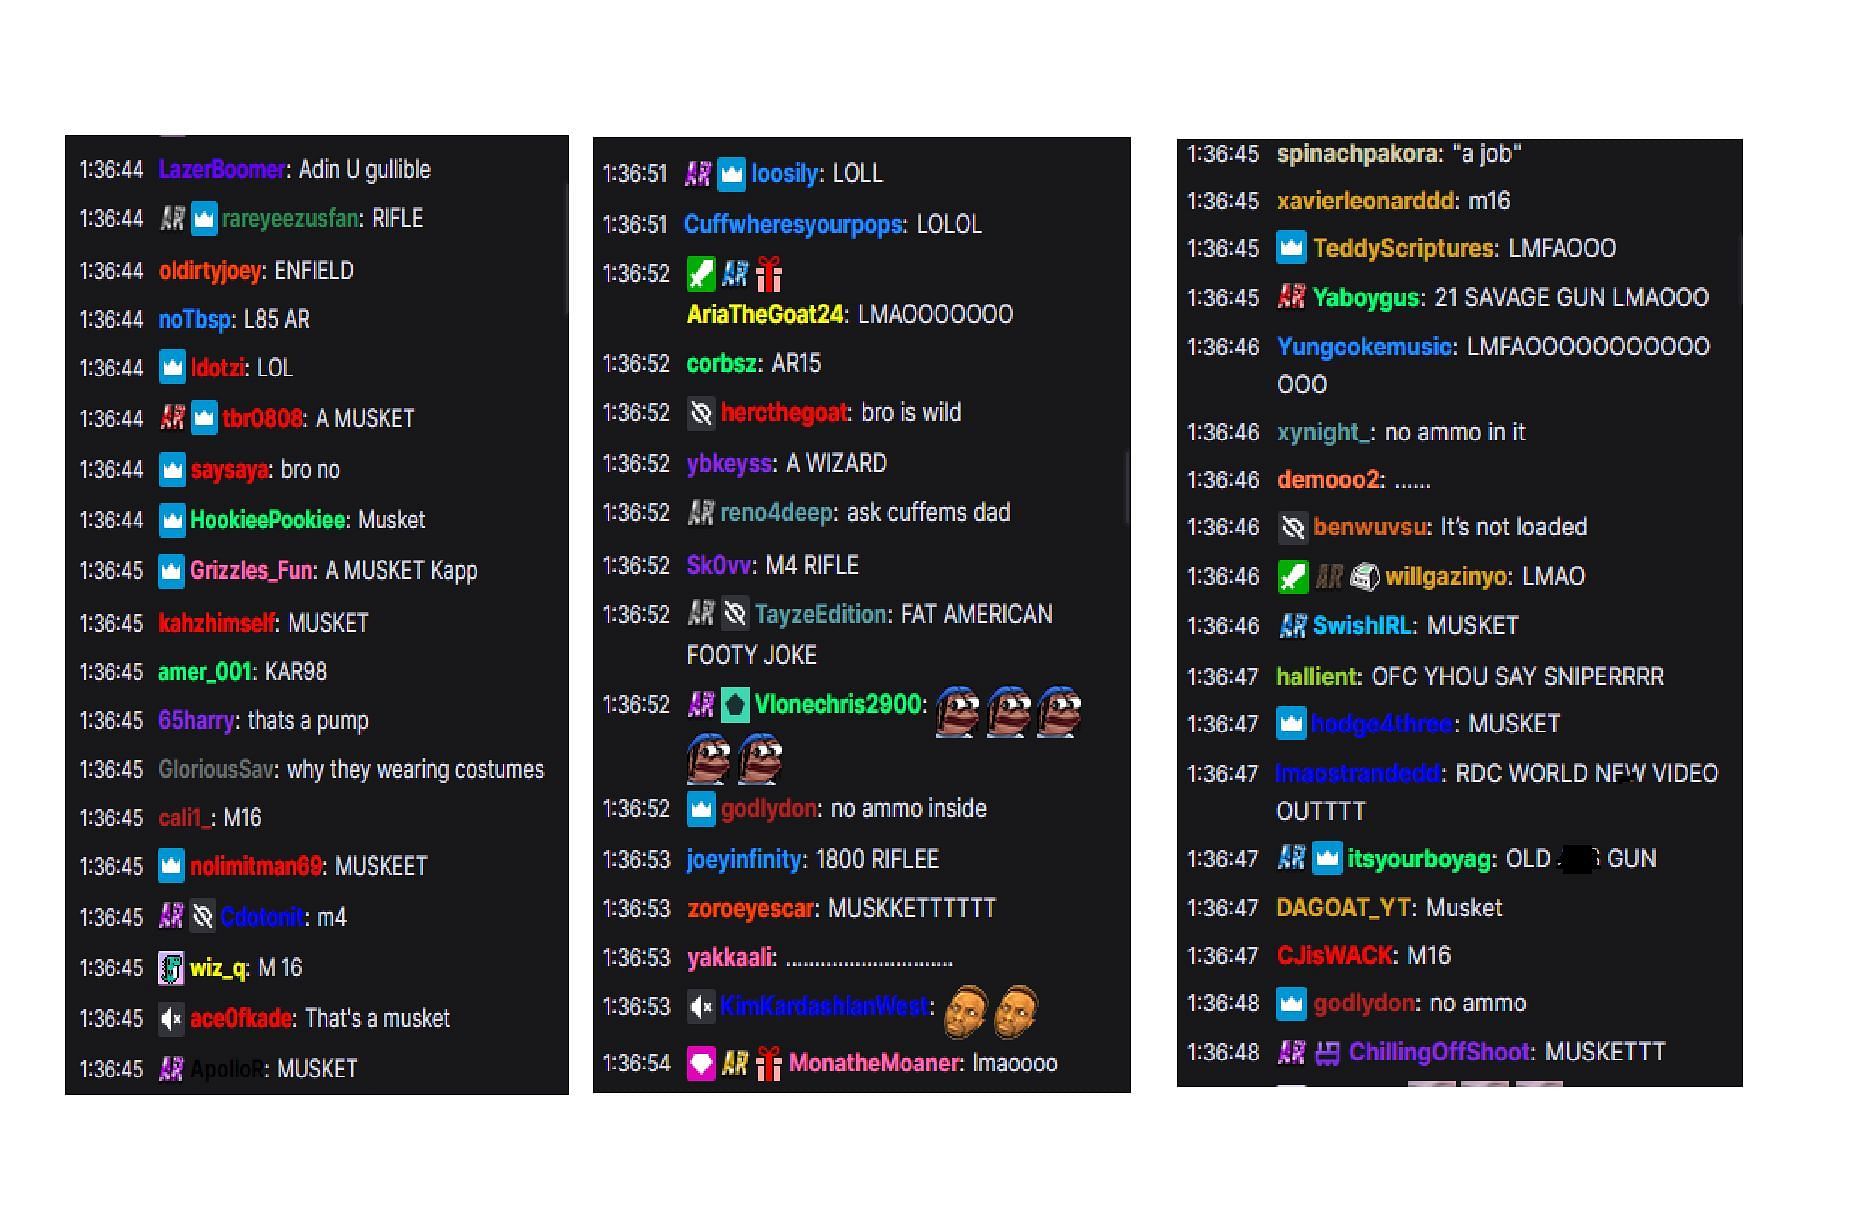 The chat went crazy with the reactions. (Image via Twitch)